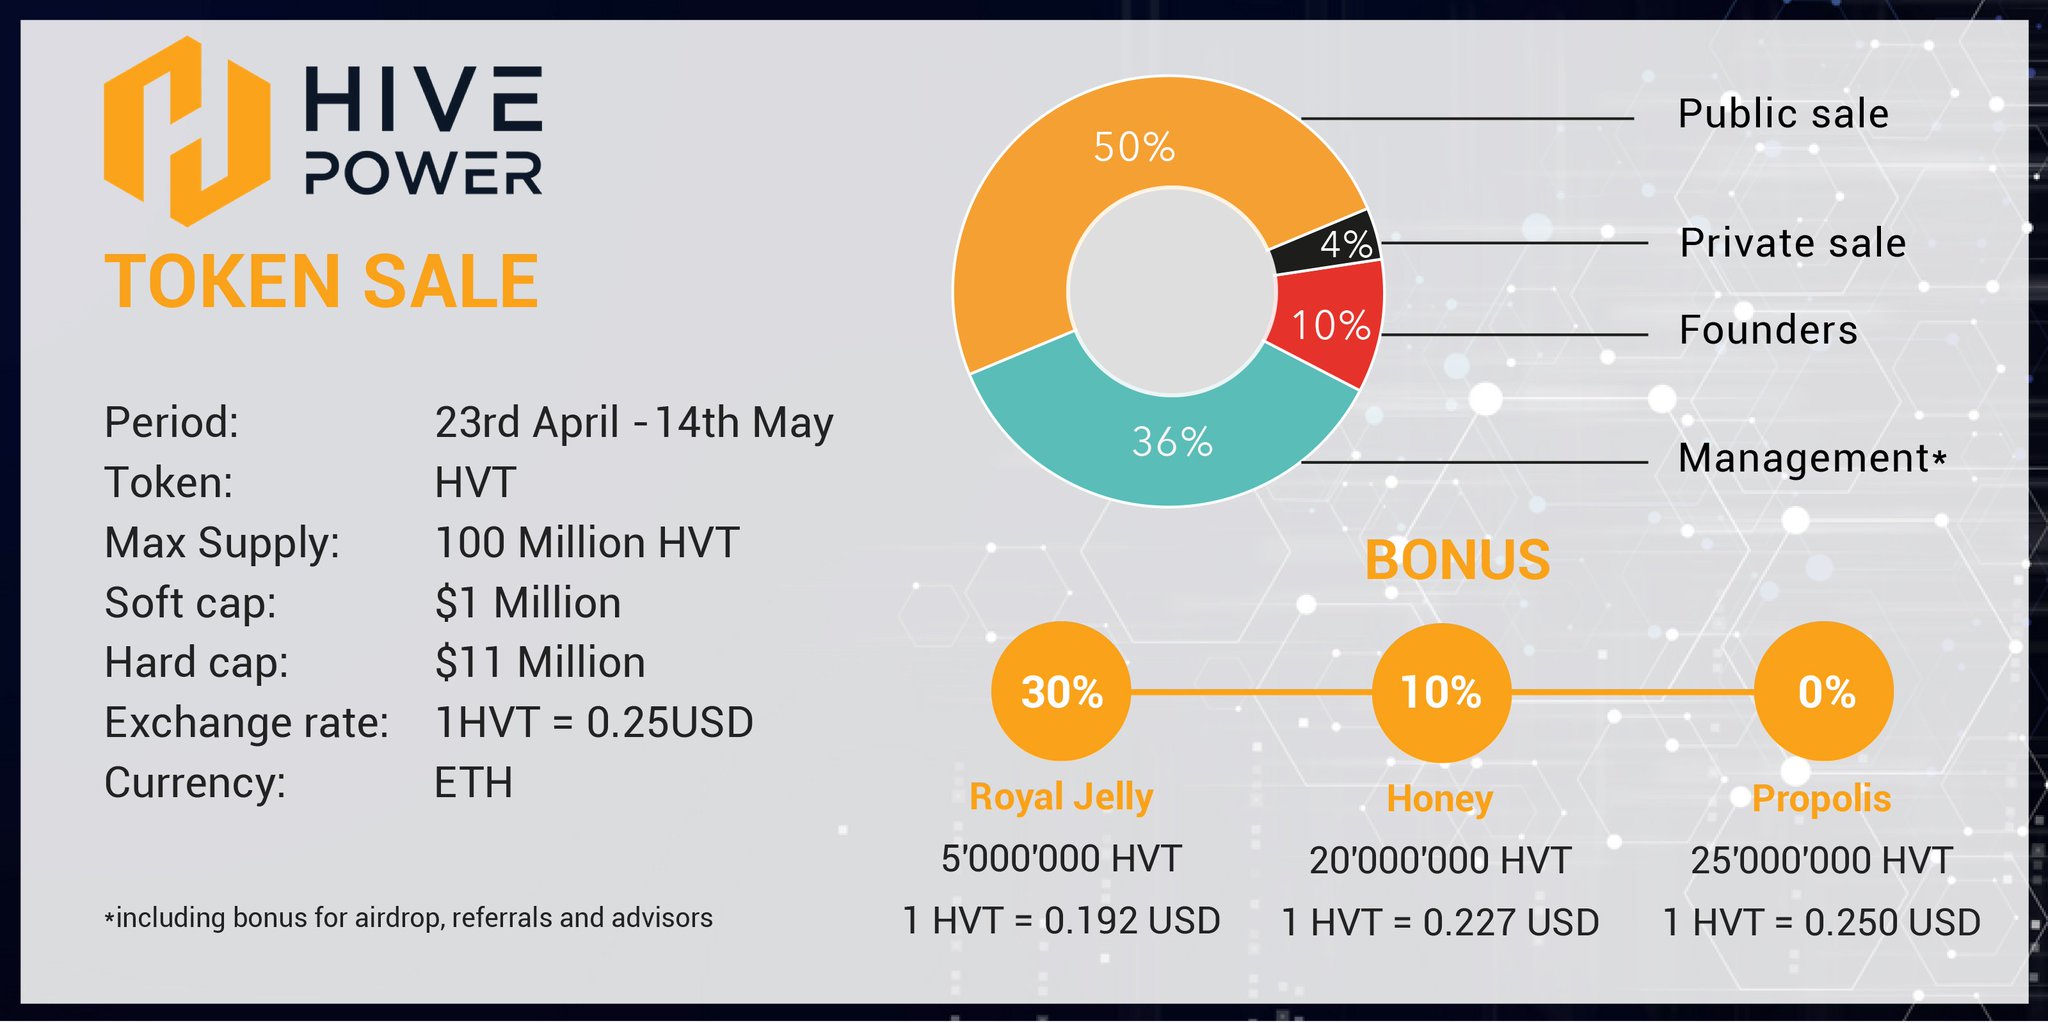 Hive Power on Twitter: " Hive Power Crowdsale Announcement!!! Read the  details here: https://t.co/NUcoQUkQOl ✈️ Join us on Telegram:  https://t.co/KFwGSfZ22v #ICO #Crowdsale #Energy #Blockchain #Ethereum  https://t.co/O1UBTkoX6x" / Twitter